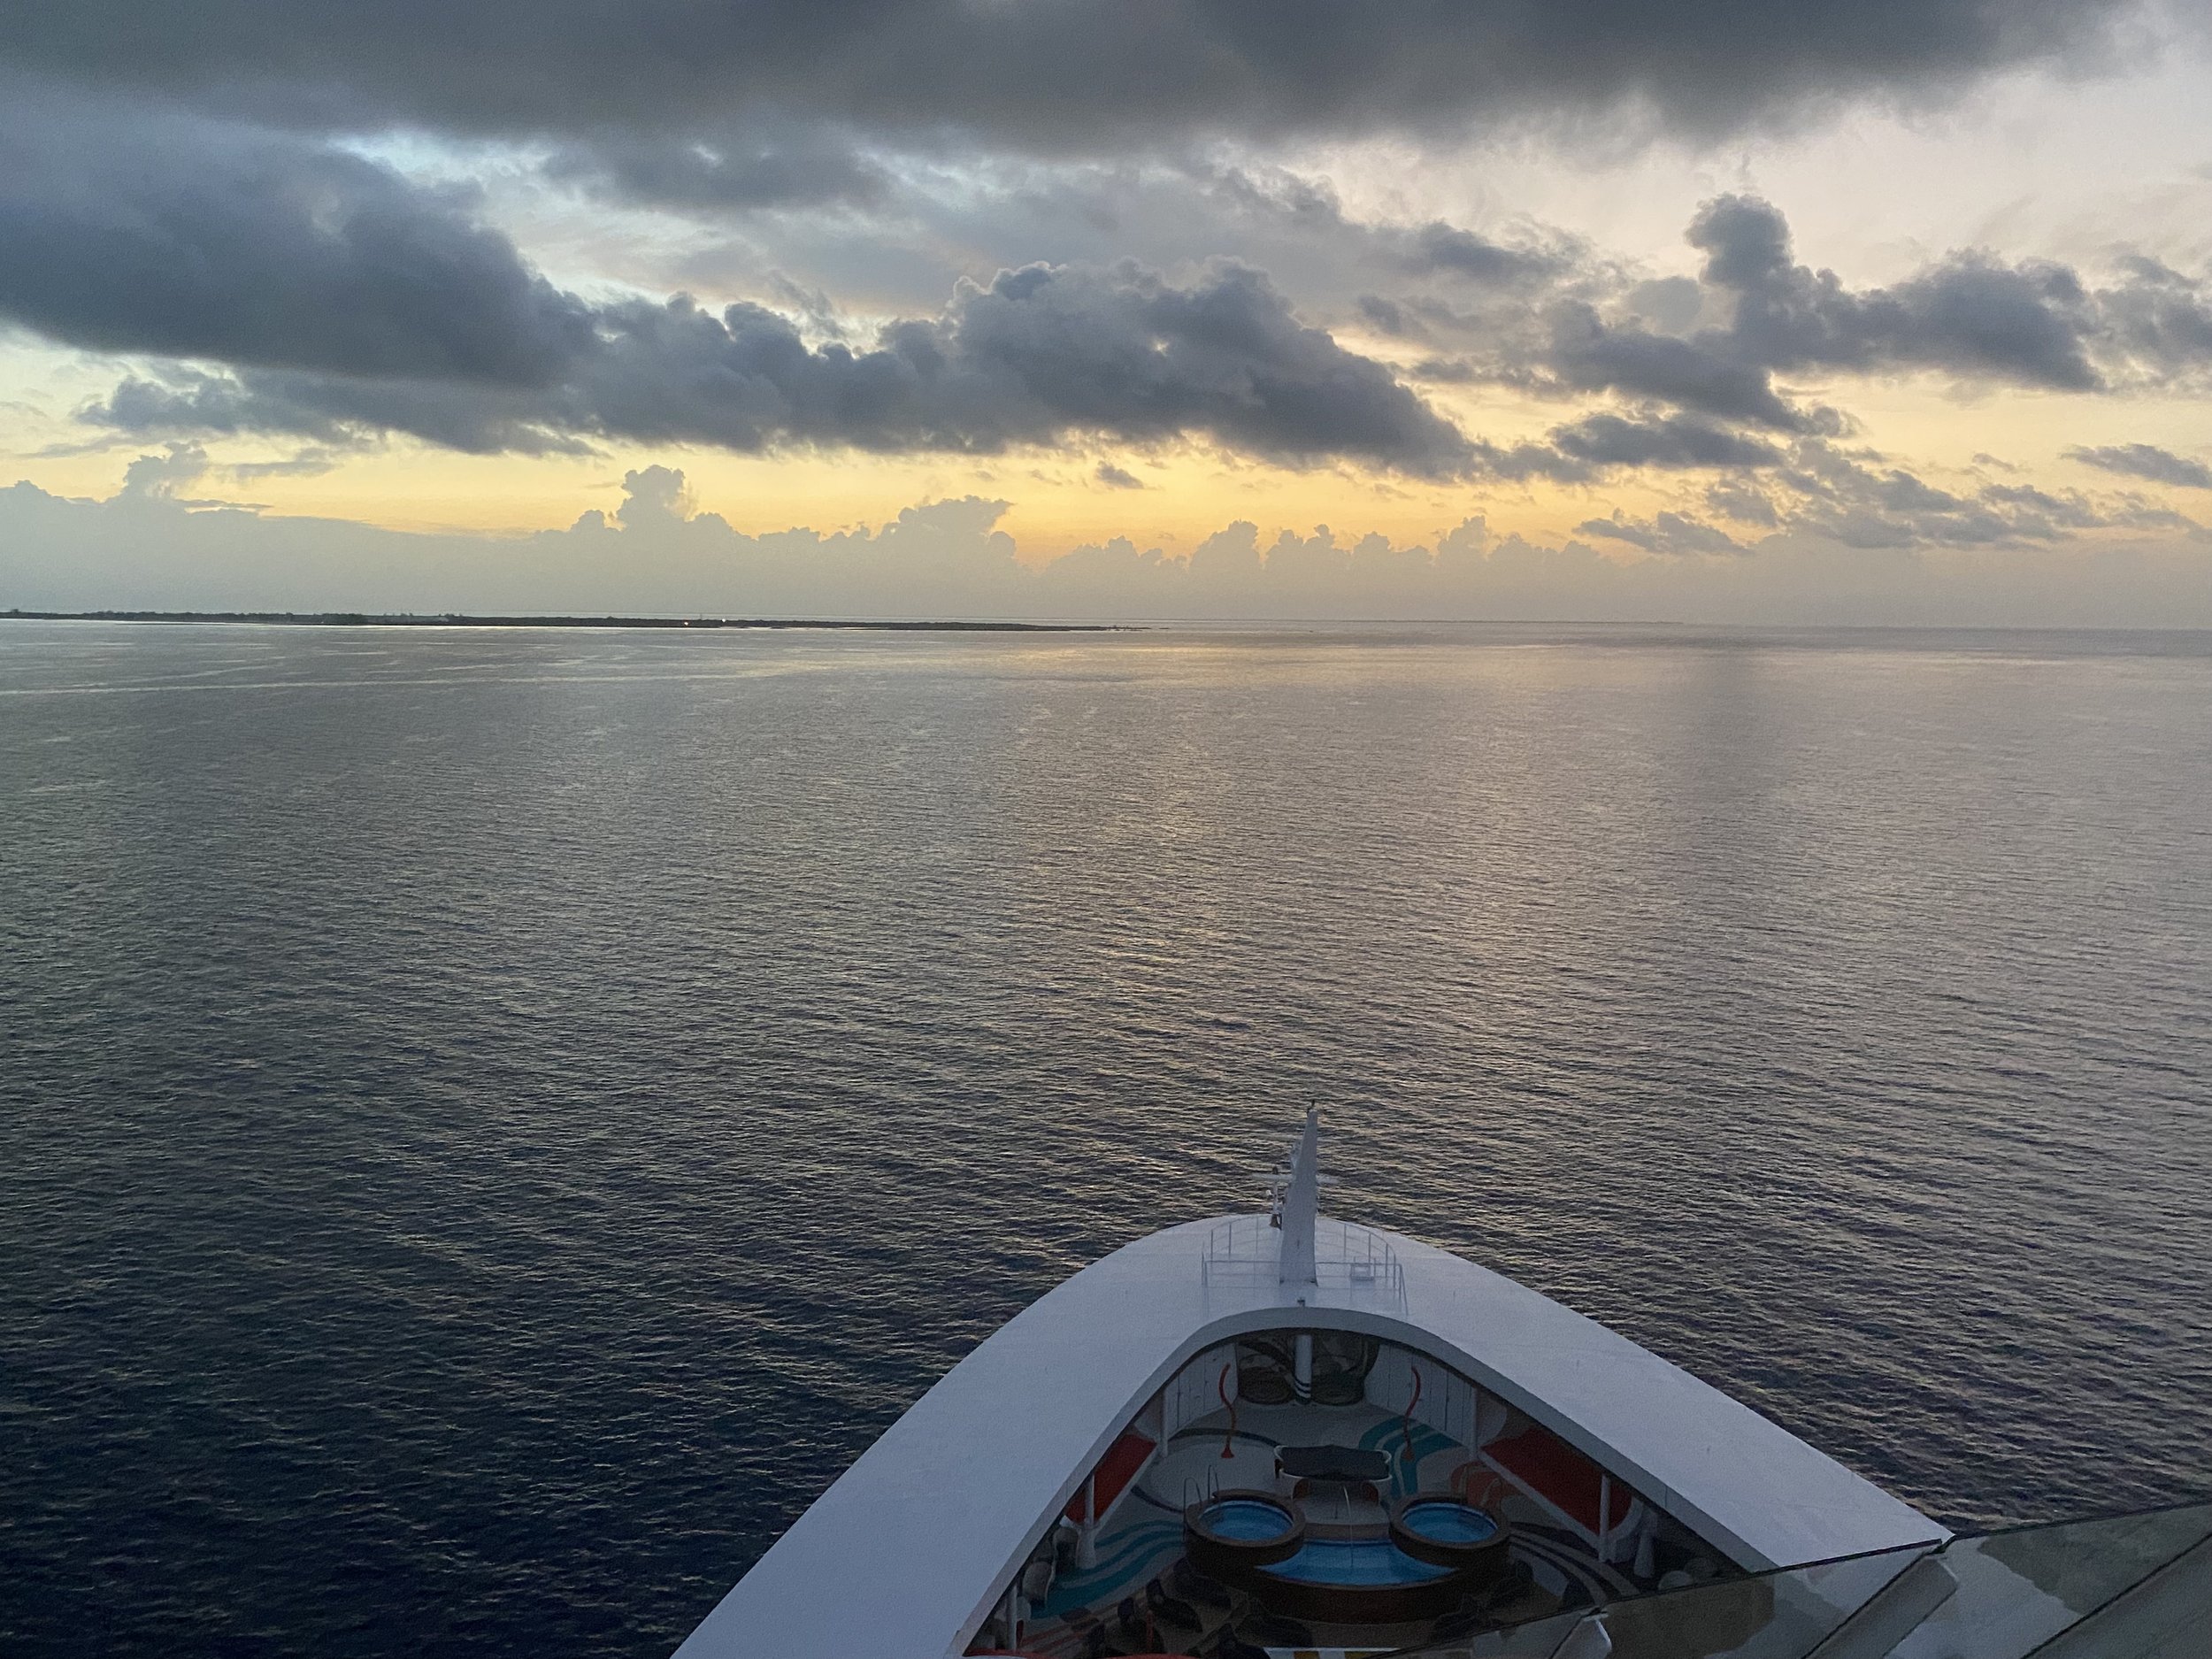  Pro Tip: If you’re an early riser, walk to the front of the ship with a hot coffee and watch the Disney Dream arrive at Castaway Cay.  You’ll also enjoy a beautiful sunrise.  